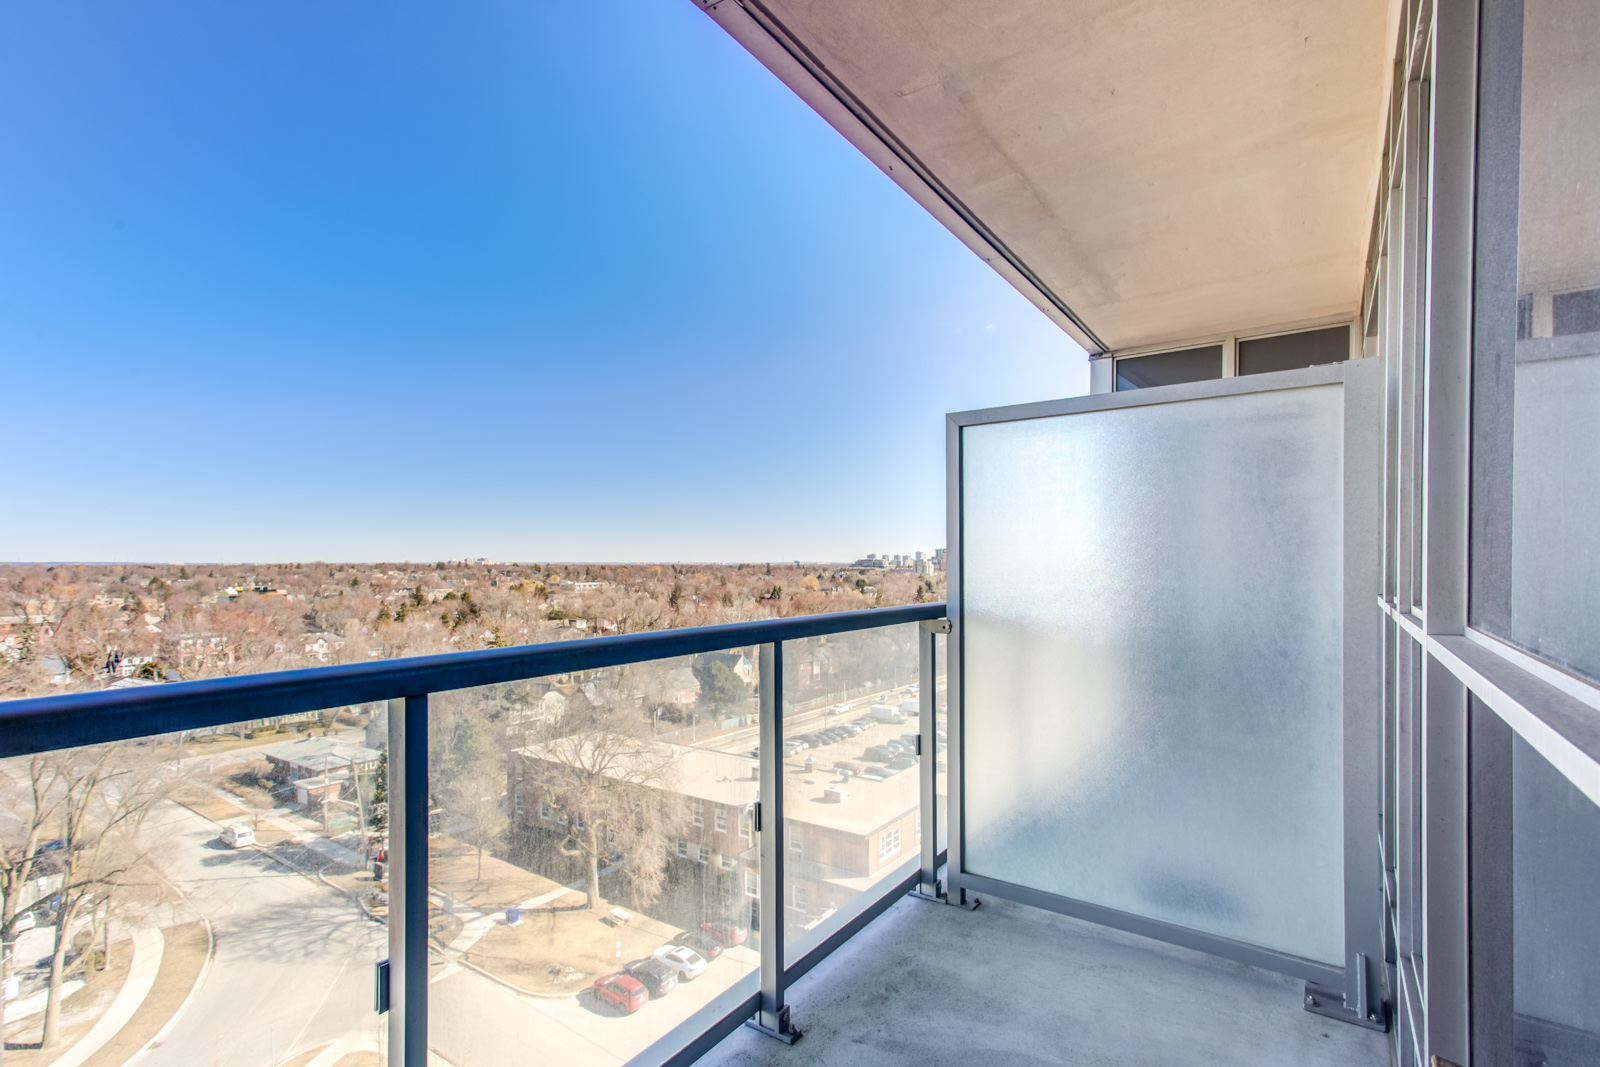 Photo of 120 Harrison Garden Unit 1025 balcony and its glass panels.